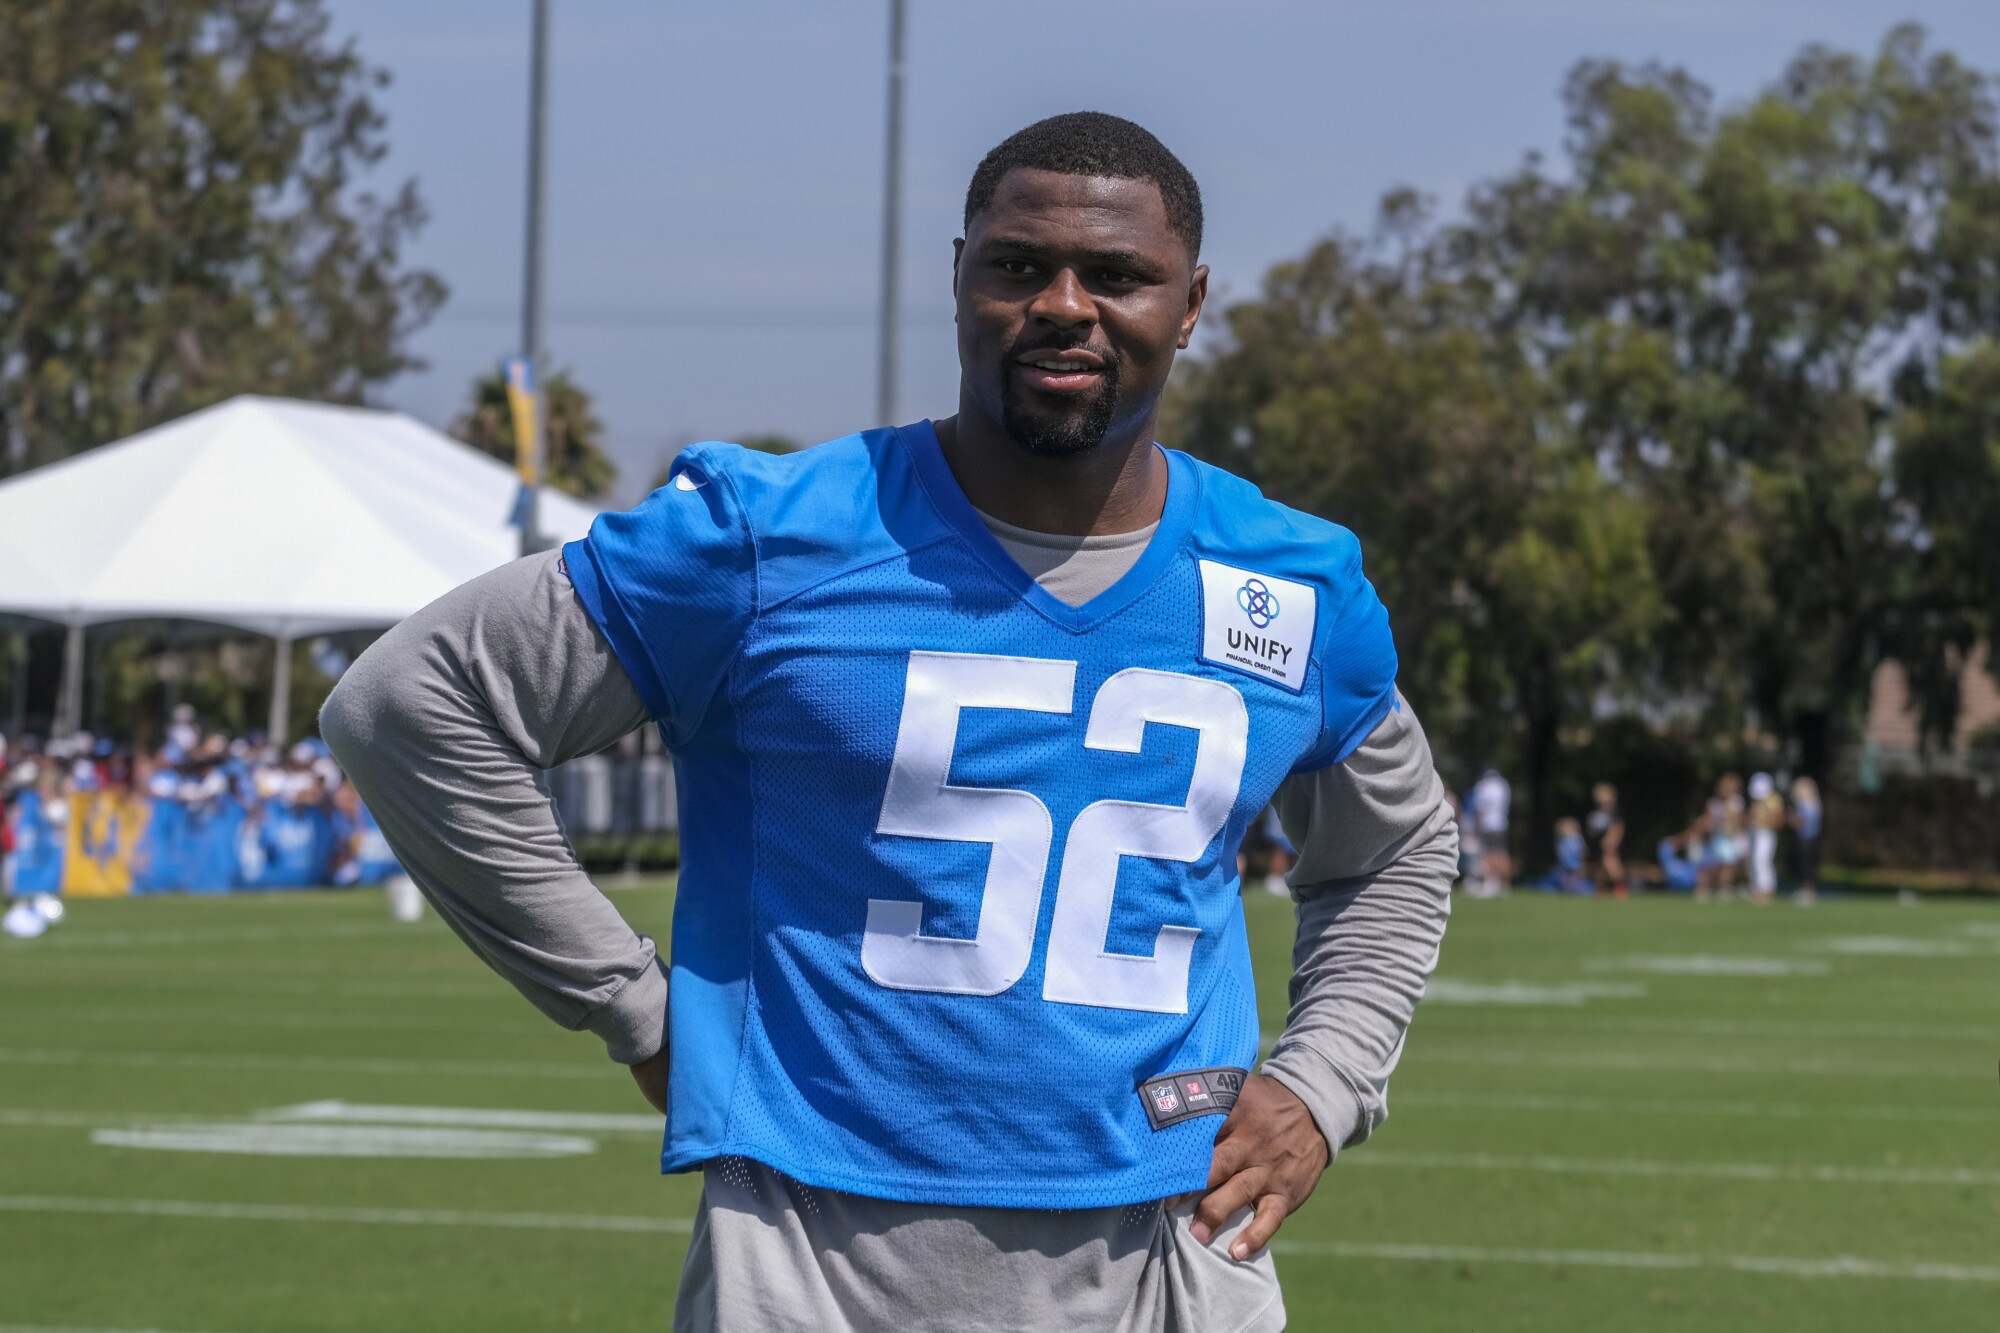 Chargers outside linebacker Khalil Mack takes part in drills at training camp in July.